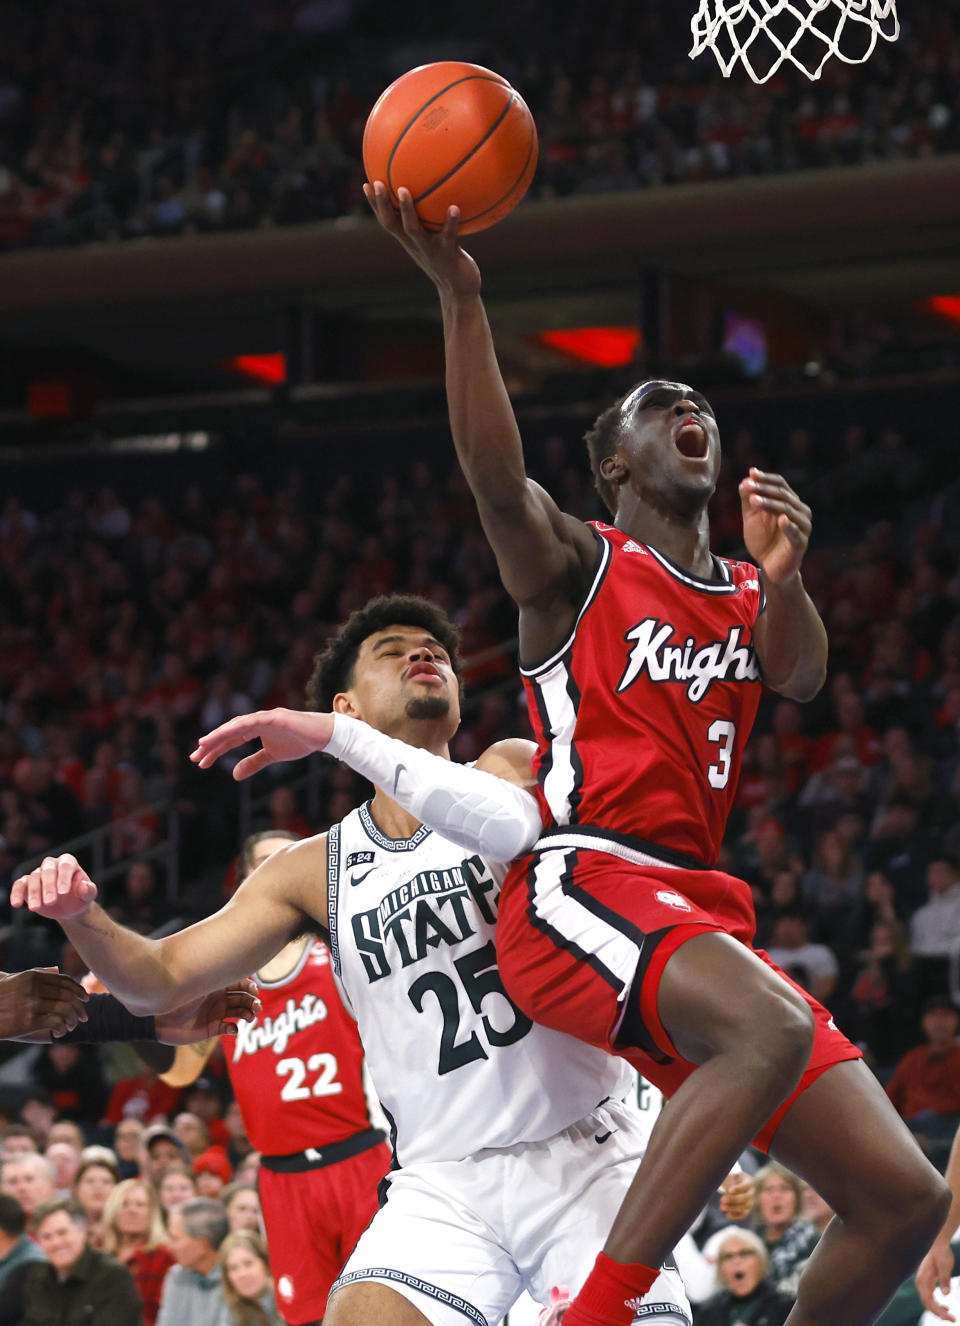 Rutgers forward Mawot Mag (3) drives to the basket against Michigan State forward Malik Hall (25) during the first half of an NCAA college basketball game in New York, Saturday, Feb. 4, 2023. (AP Photo/Noah K. Murray)